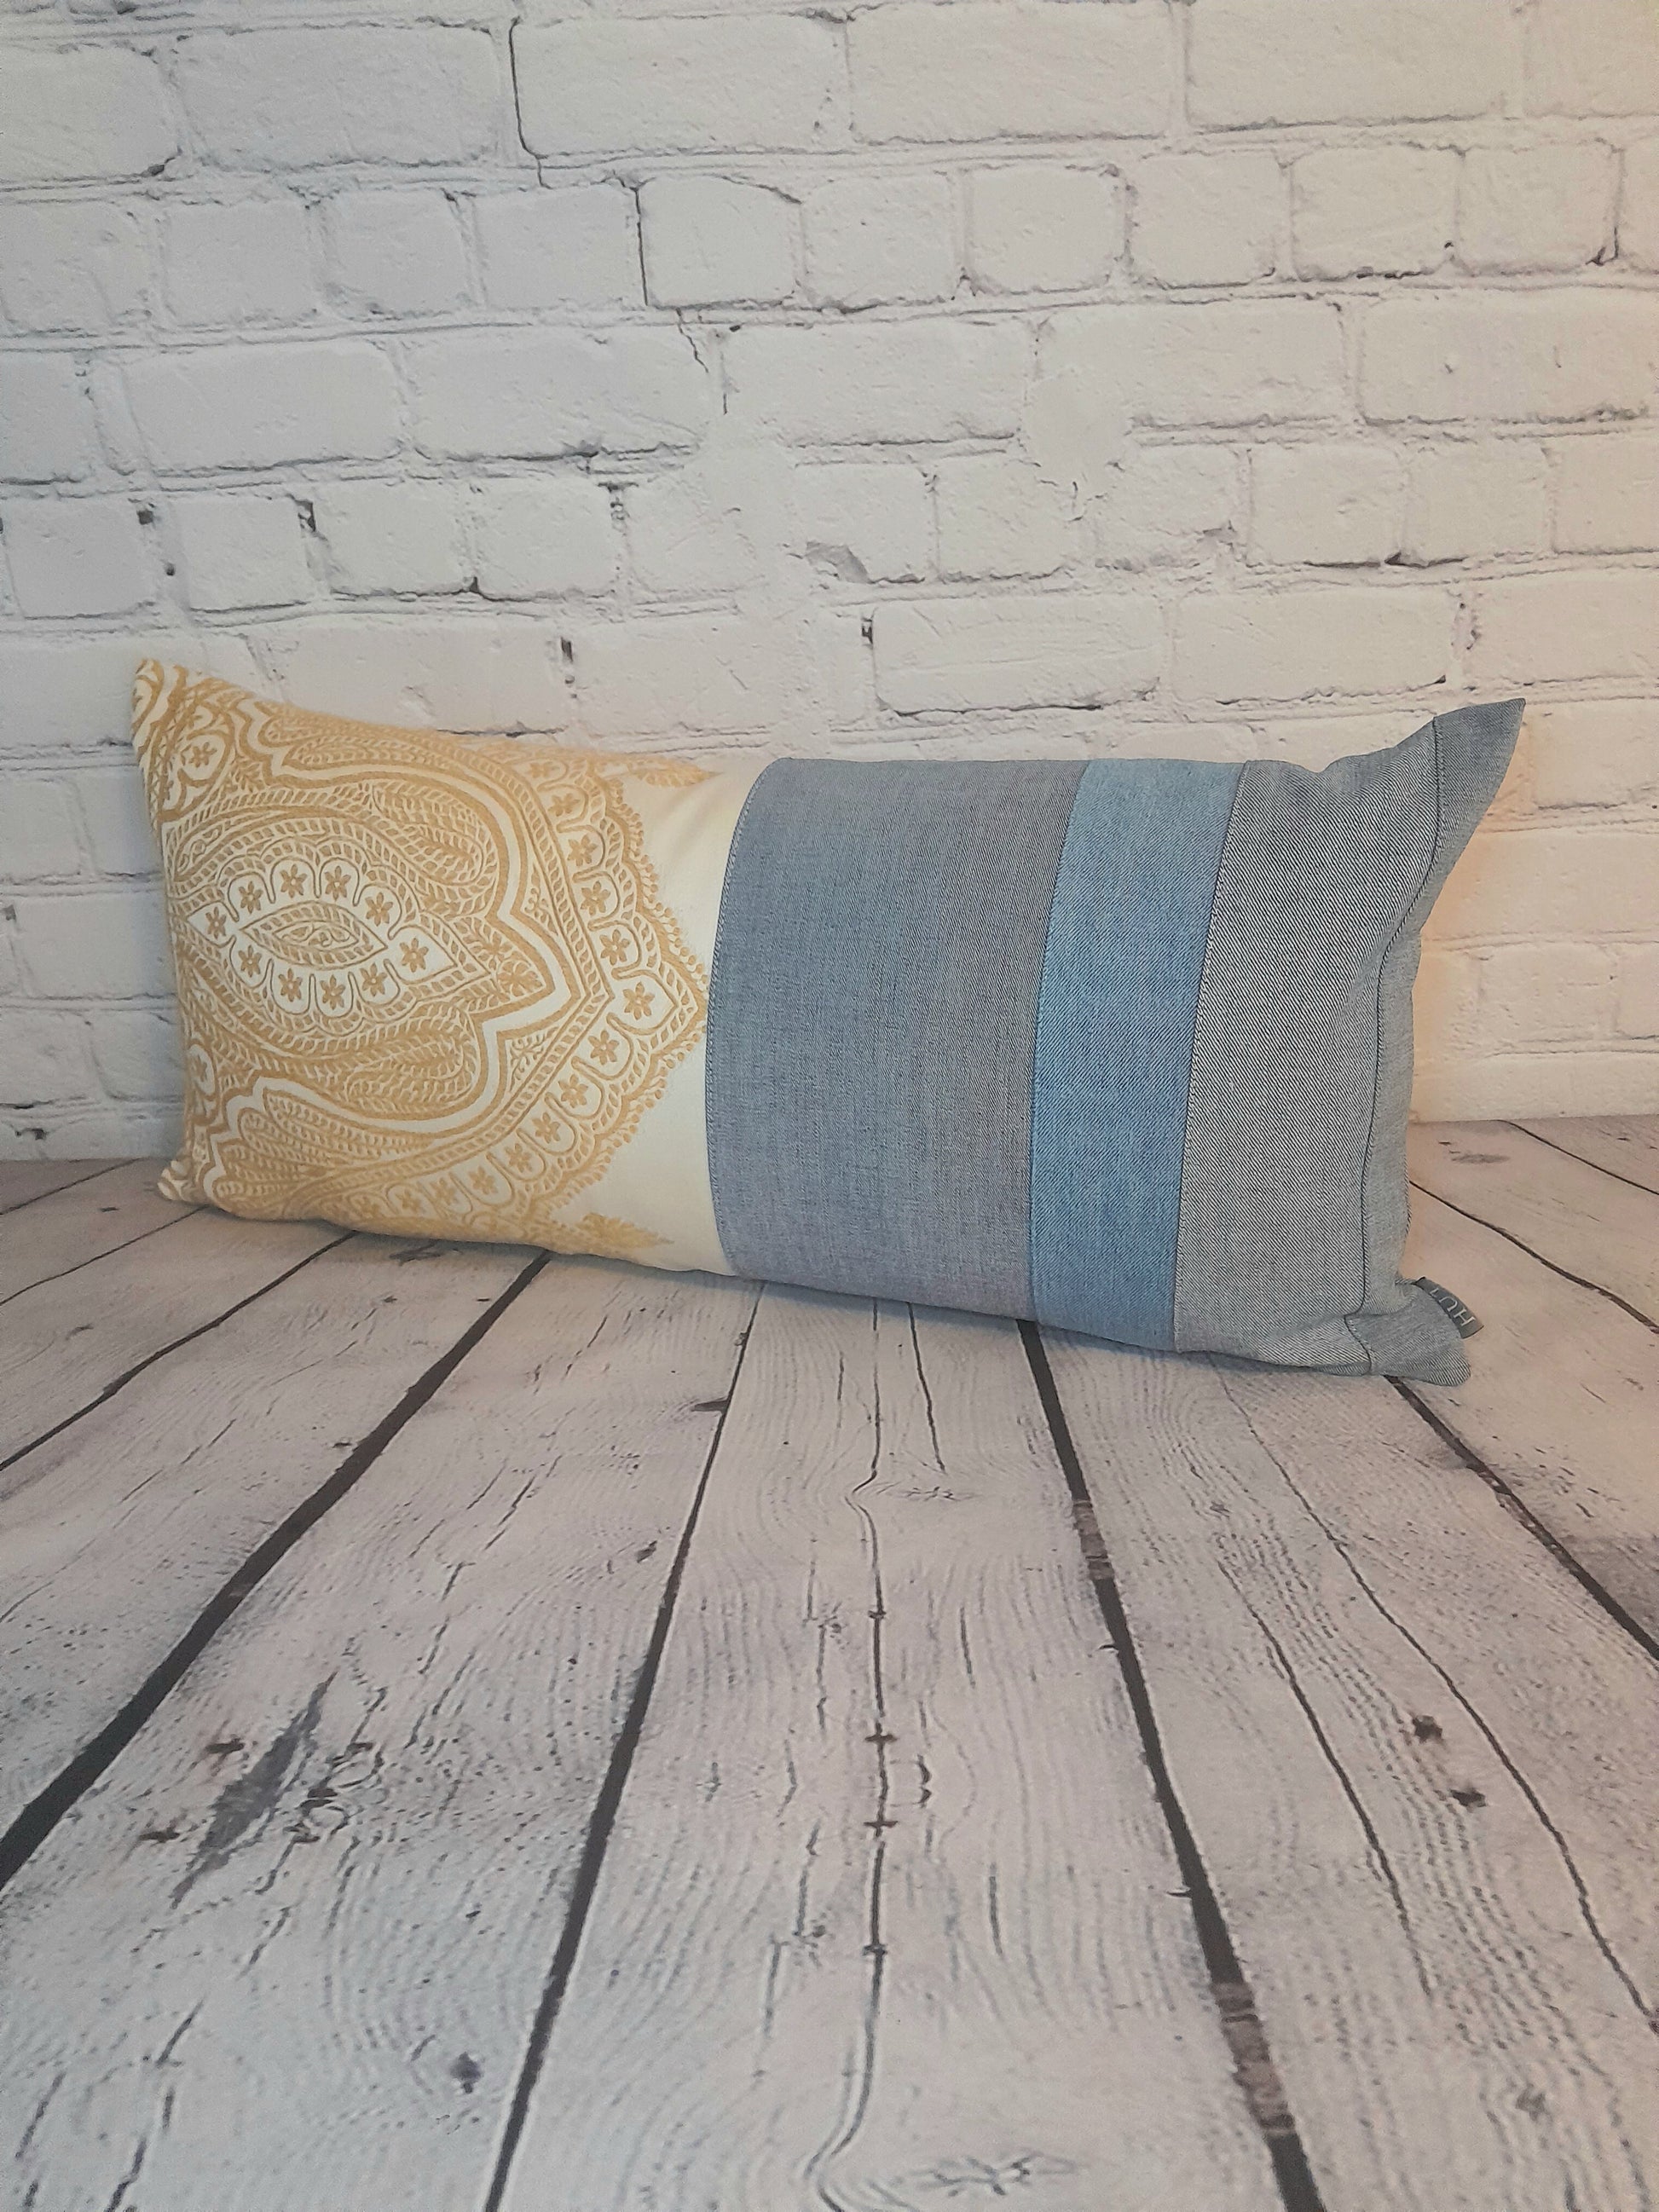 luxury handmade denim cushion cover rectangle blue yellow, upcycled throw pillow in blue, cream and yellow.